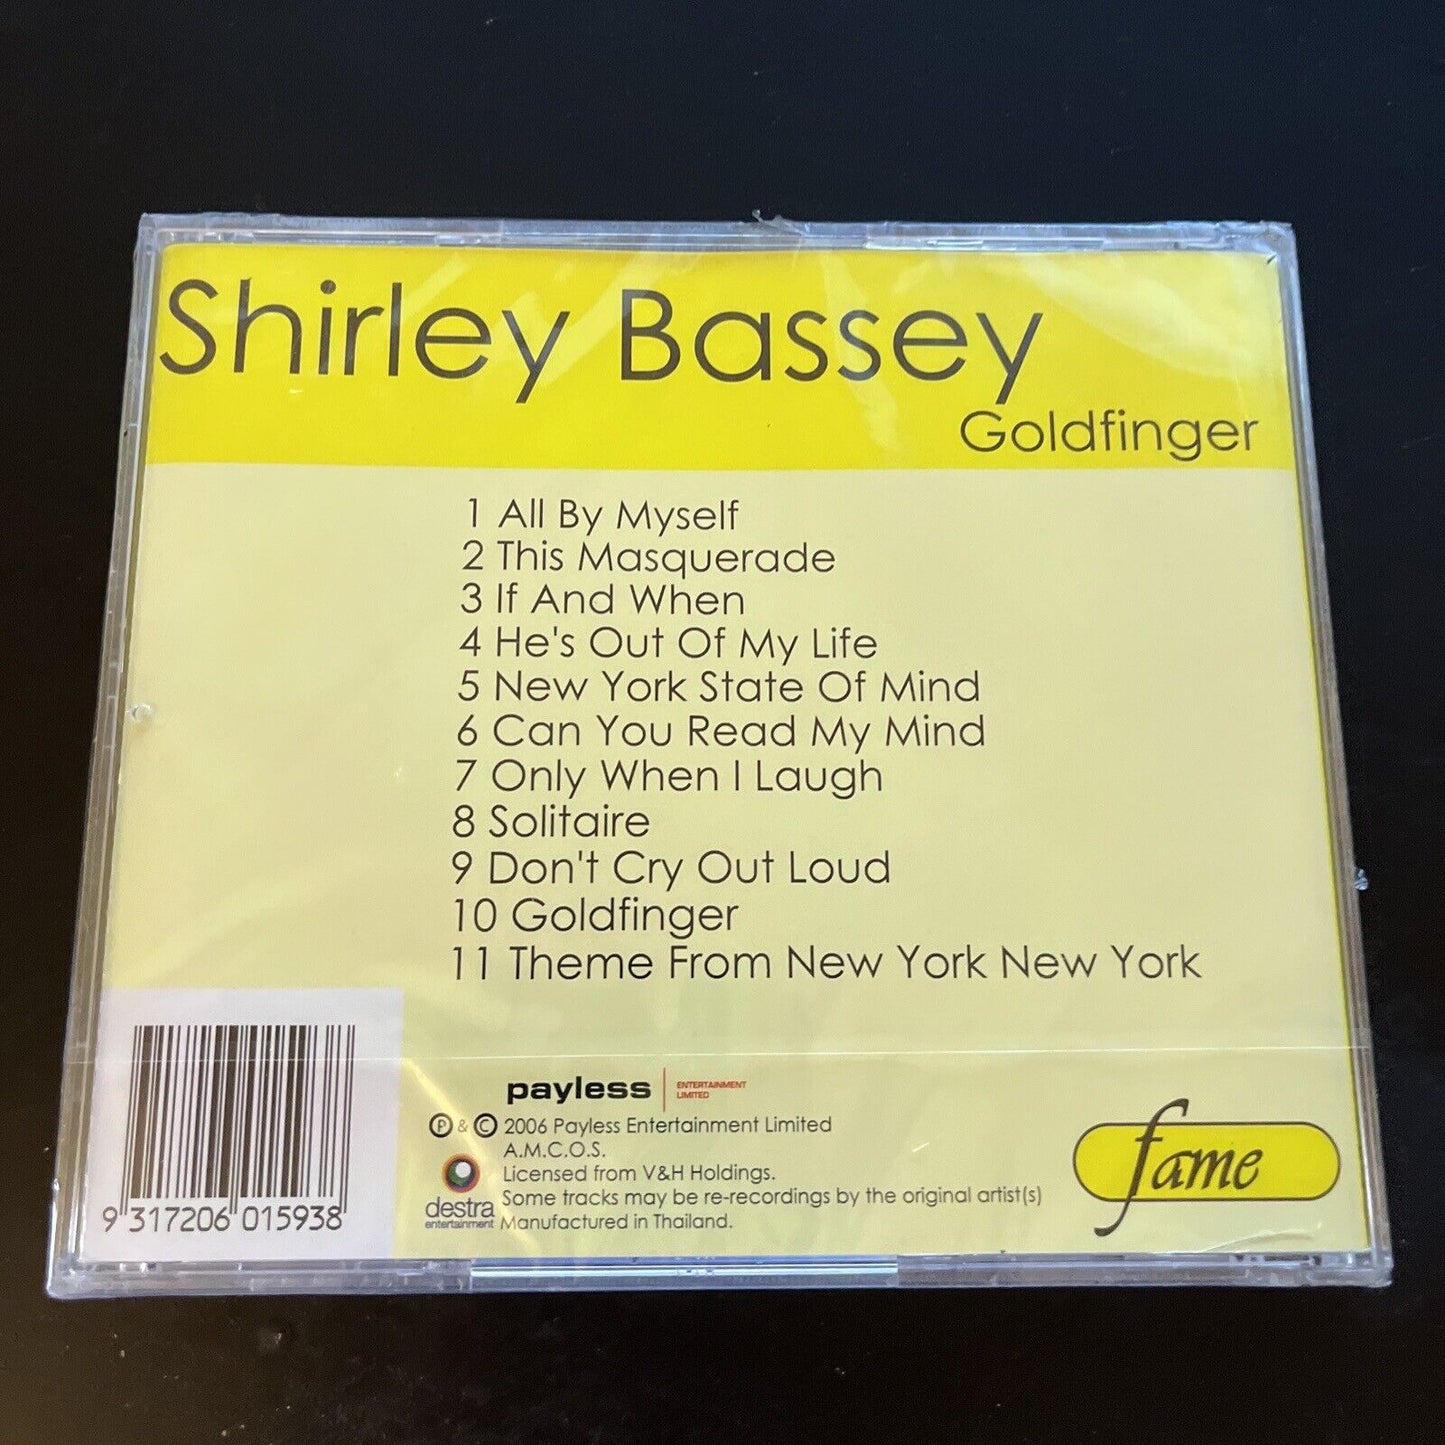 Shirley Bassey - Goldfinger: 20 Great Songs (CD, 1993)